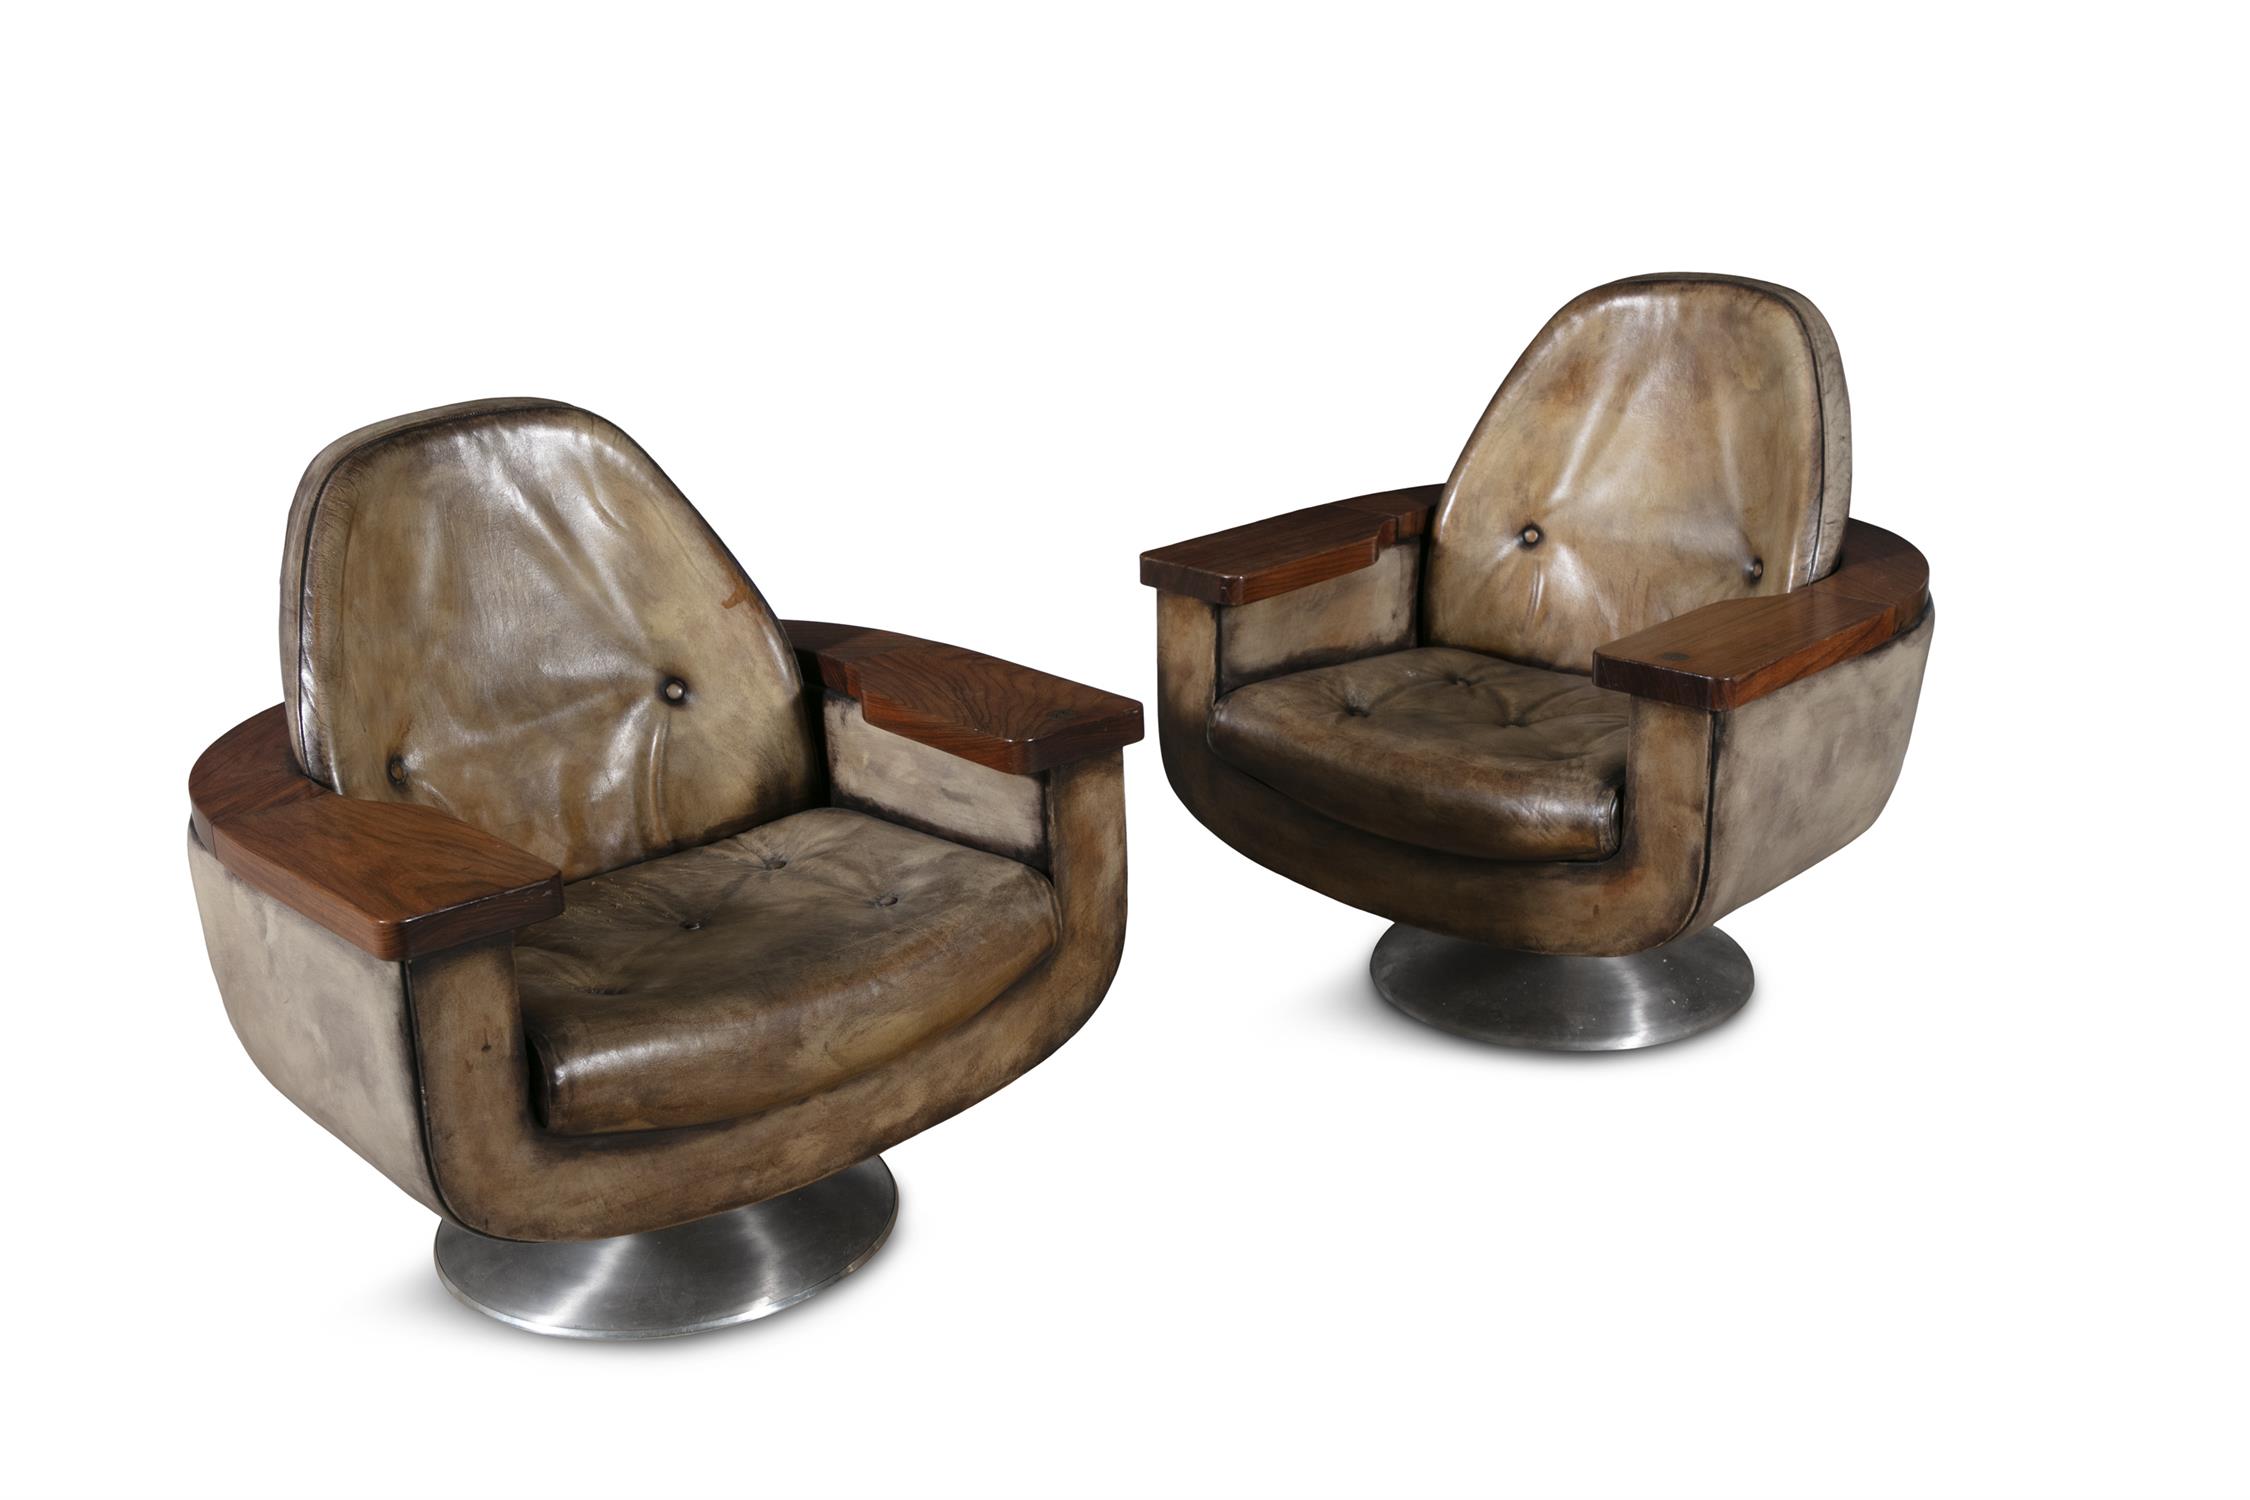 PETER HOYTE A pair of armchairs by Peter Hoyte in rosewood and leather, on a brushed aluminium - Image 3 of 9